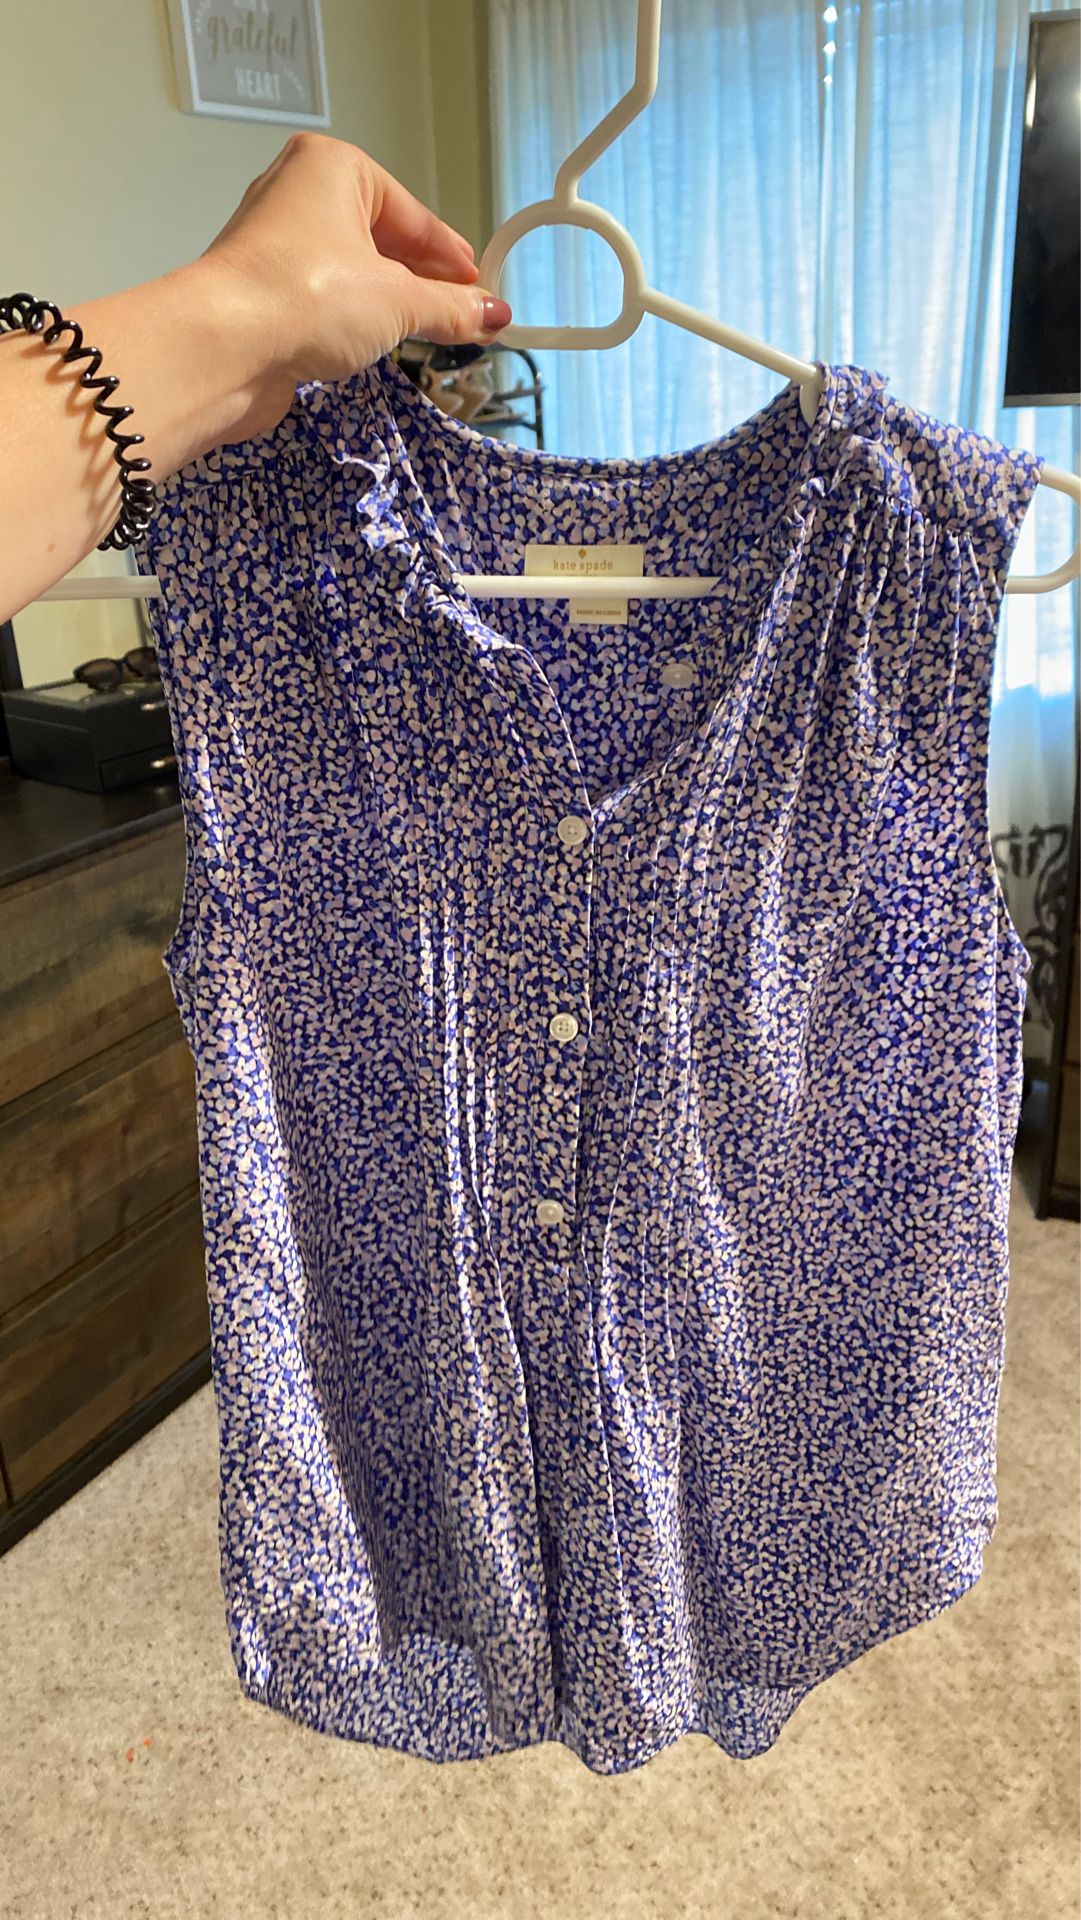 Kate spade button up top size small